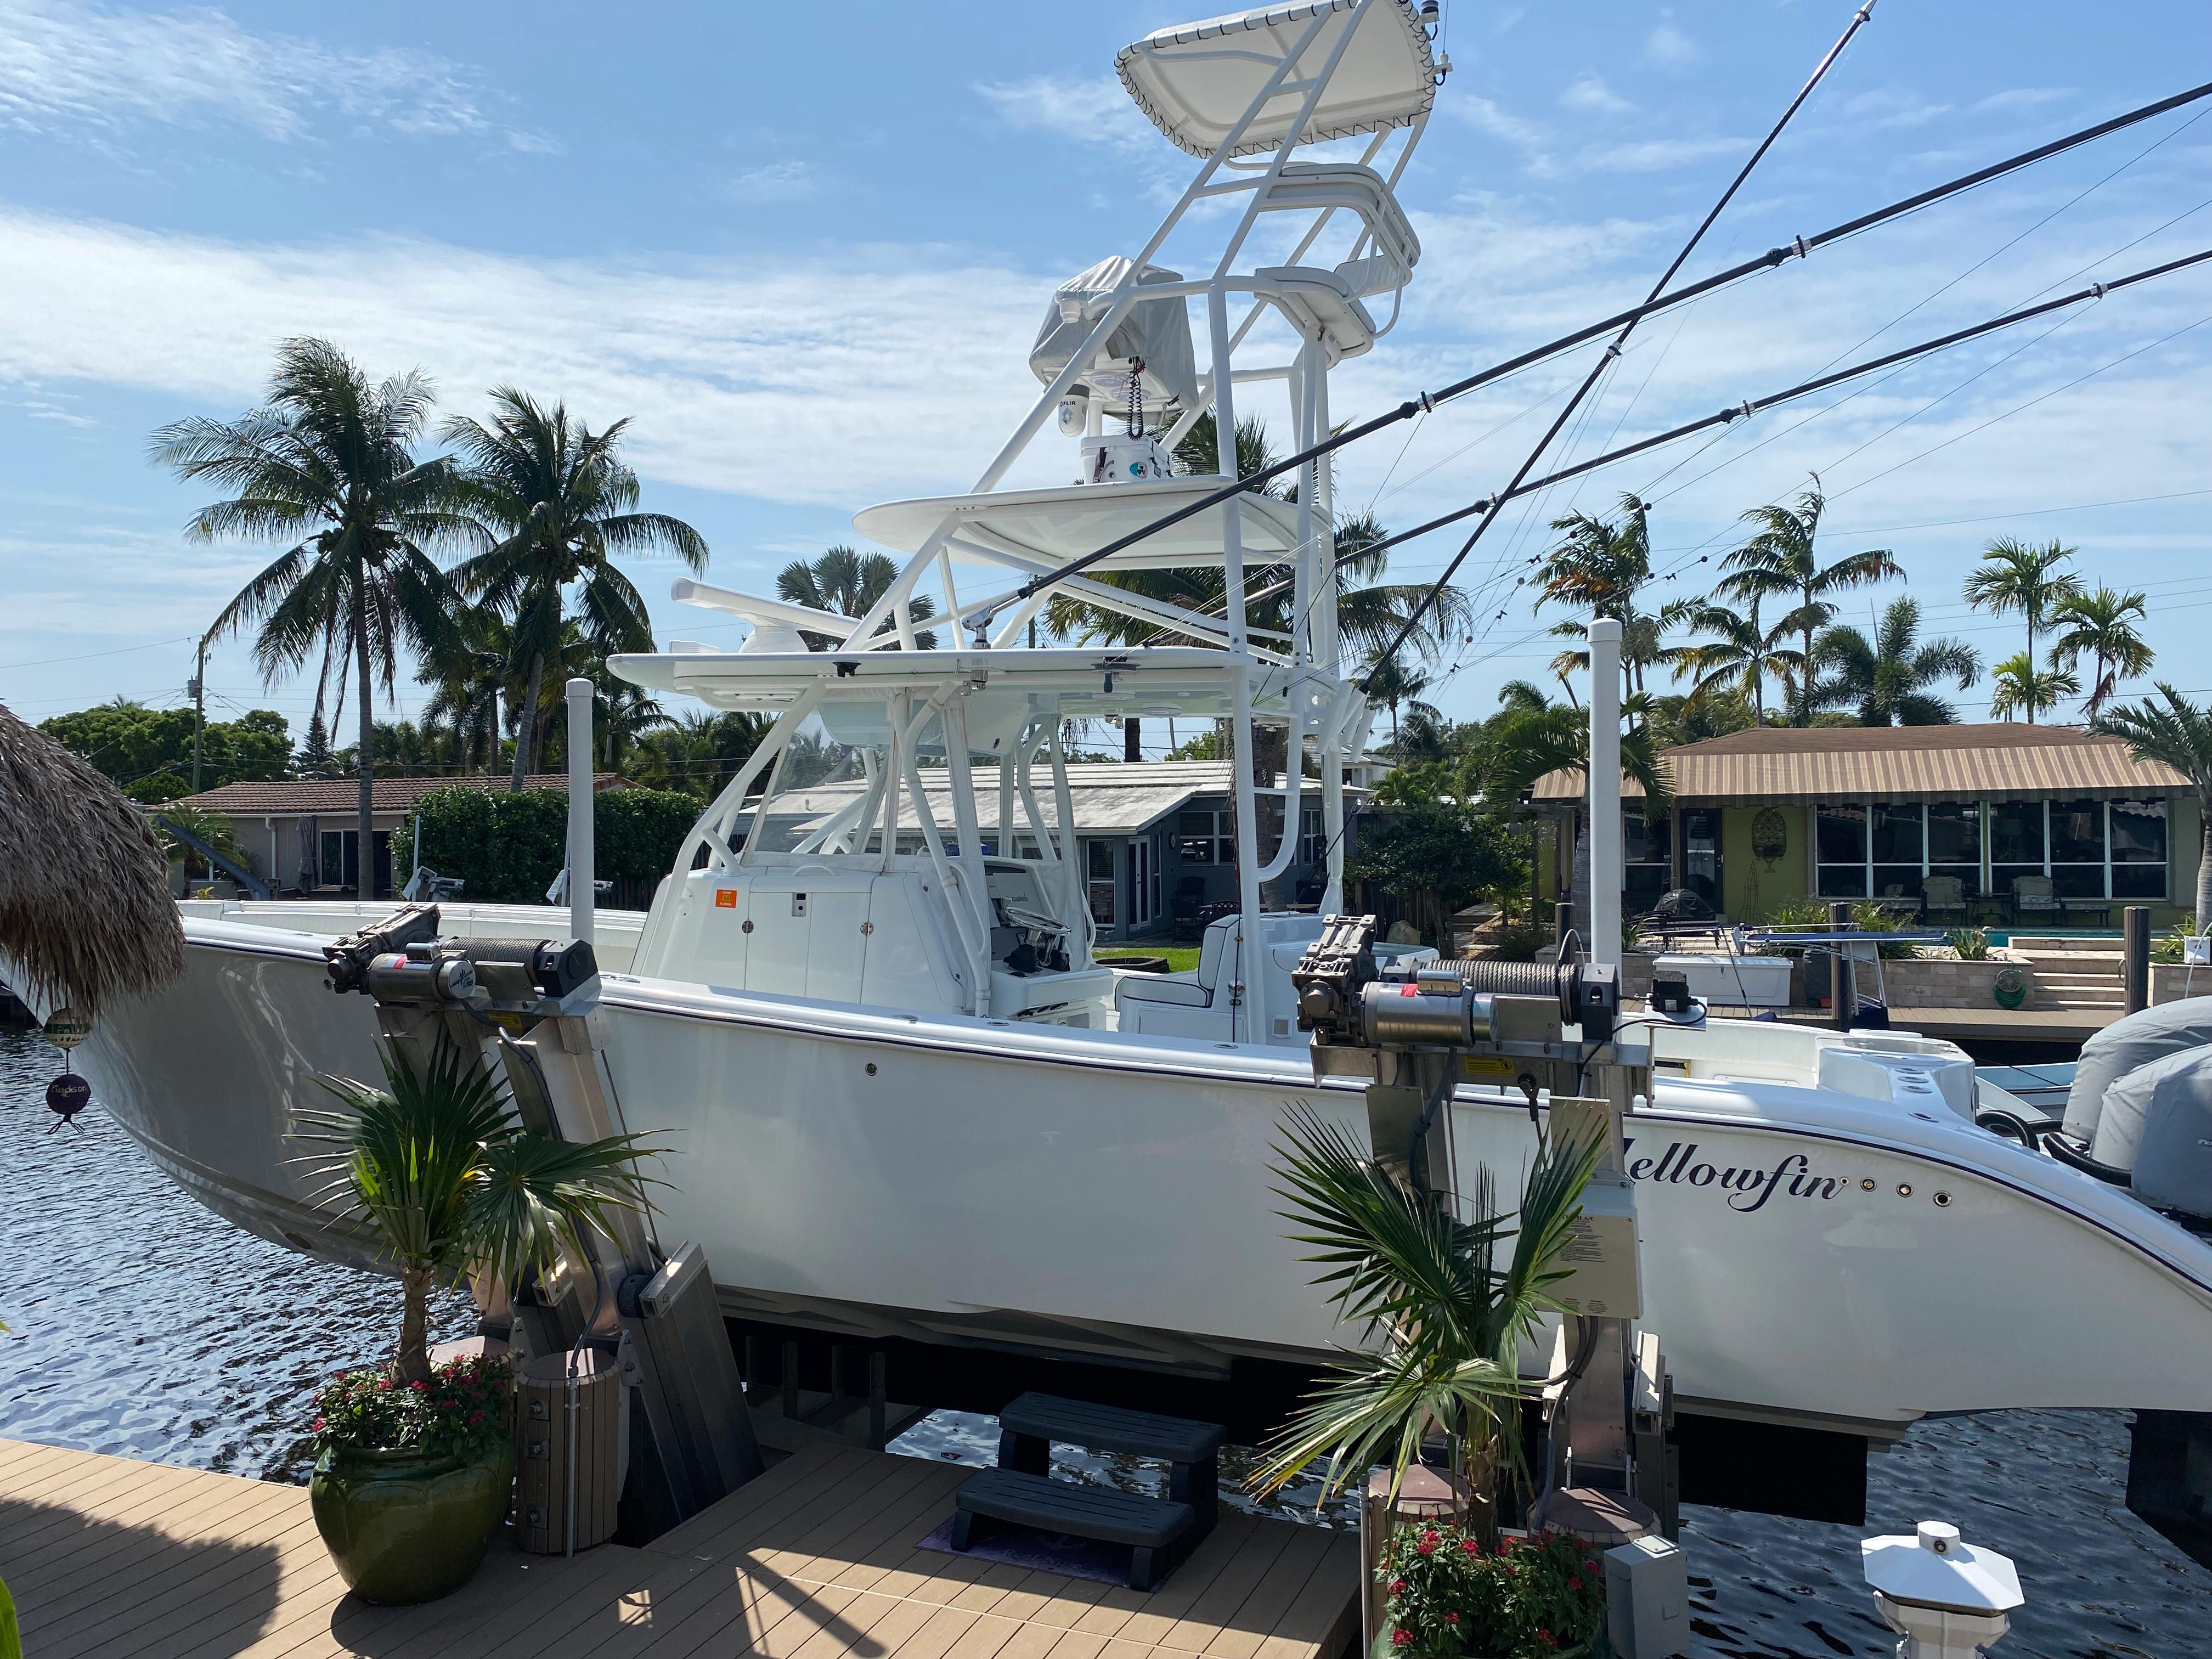 39 Yellowfin 2012 Reel Nole Fort Lauderdale, Florida Sold on 2023-01-23 by  Denison Yacht Sales